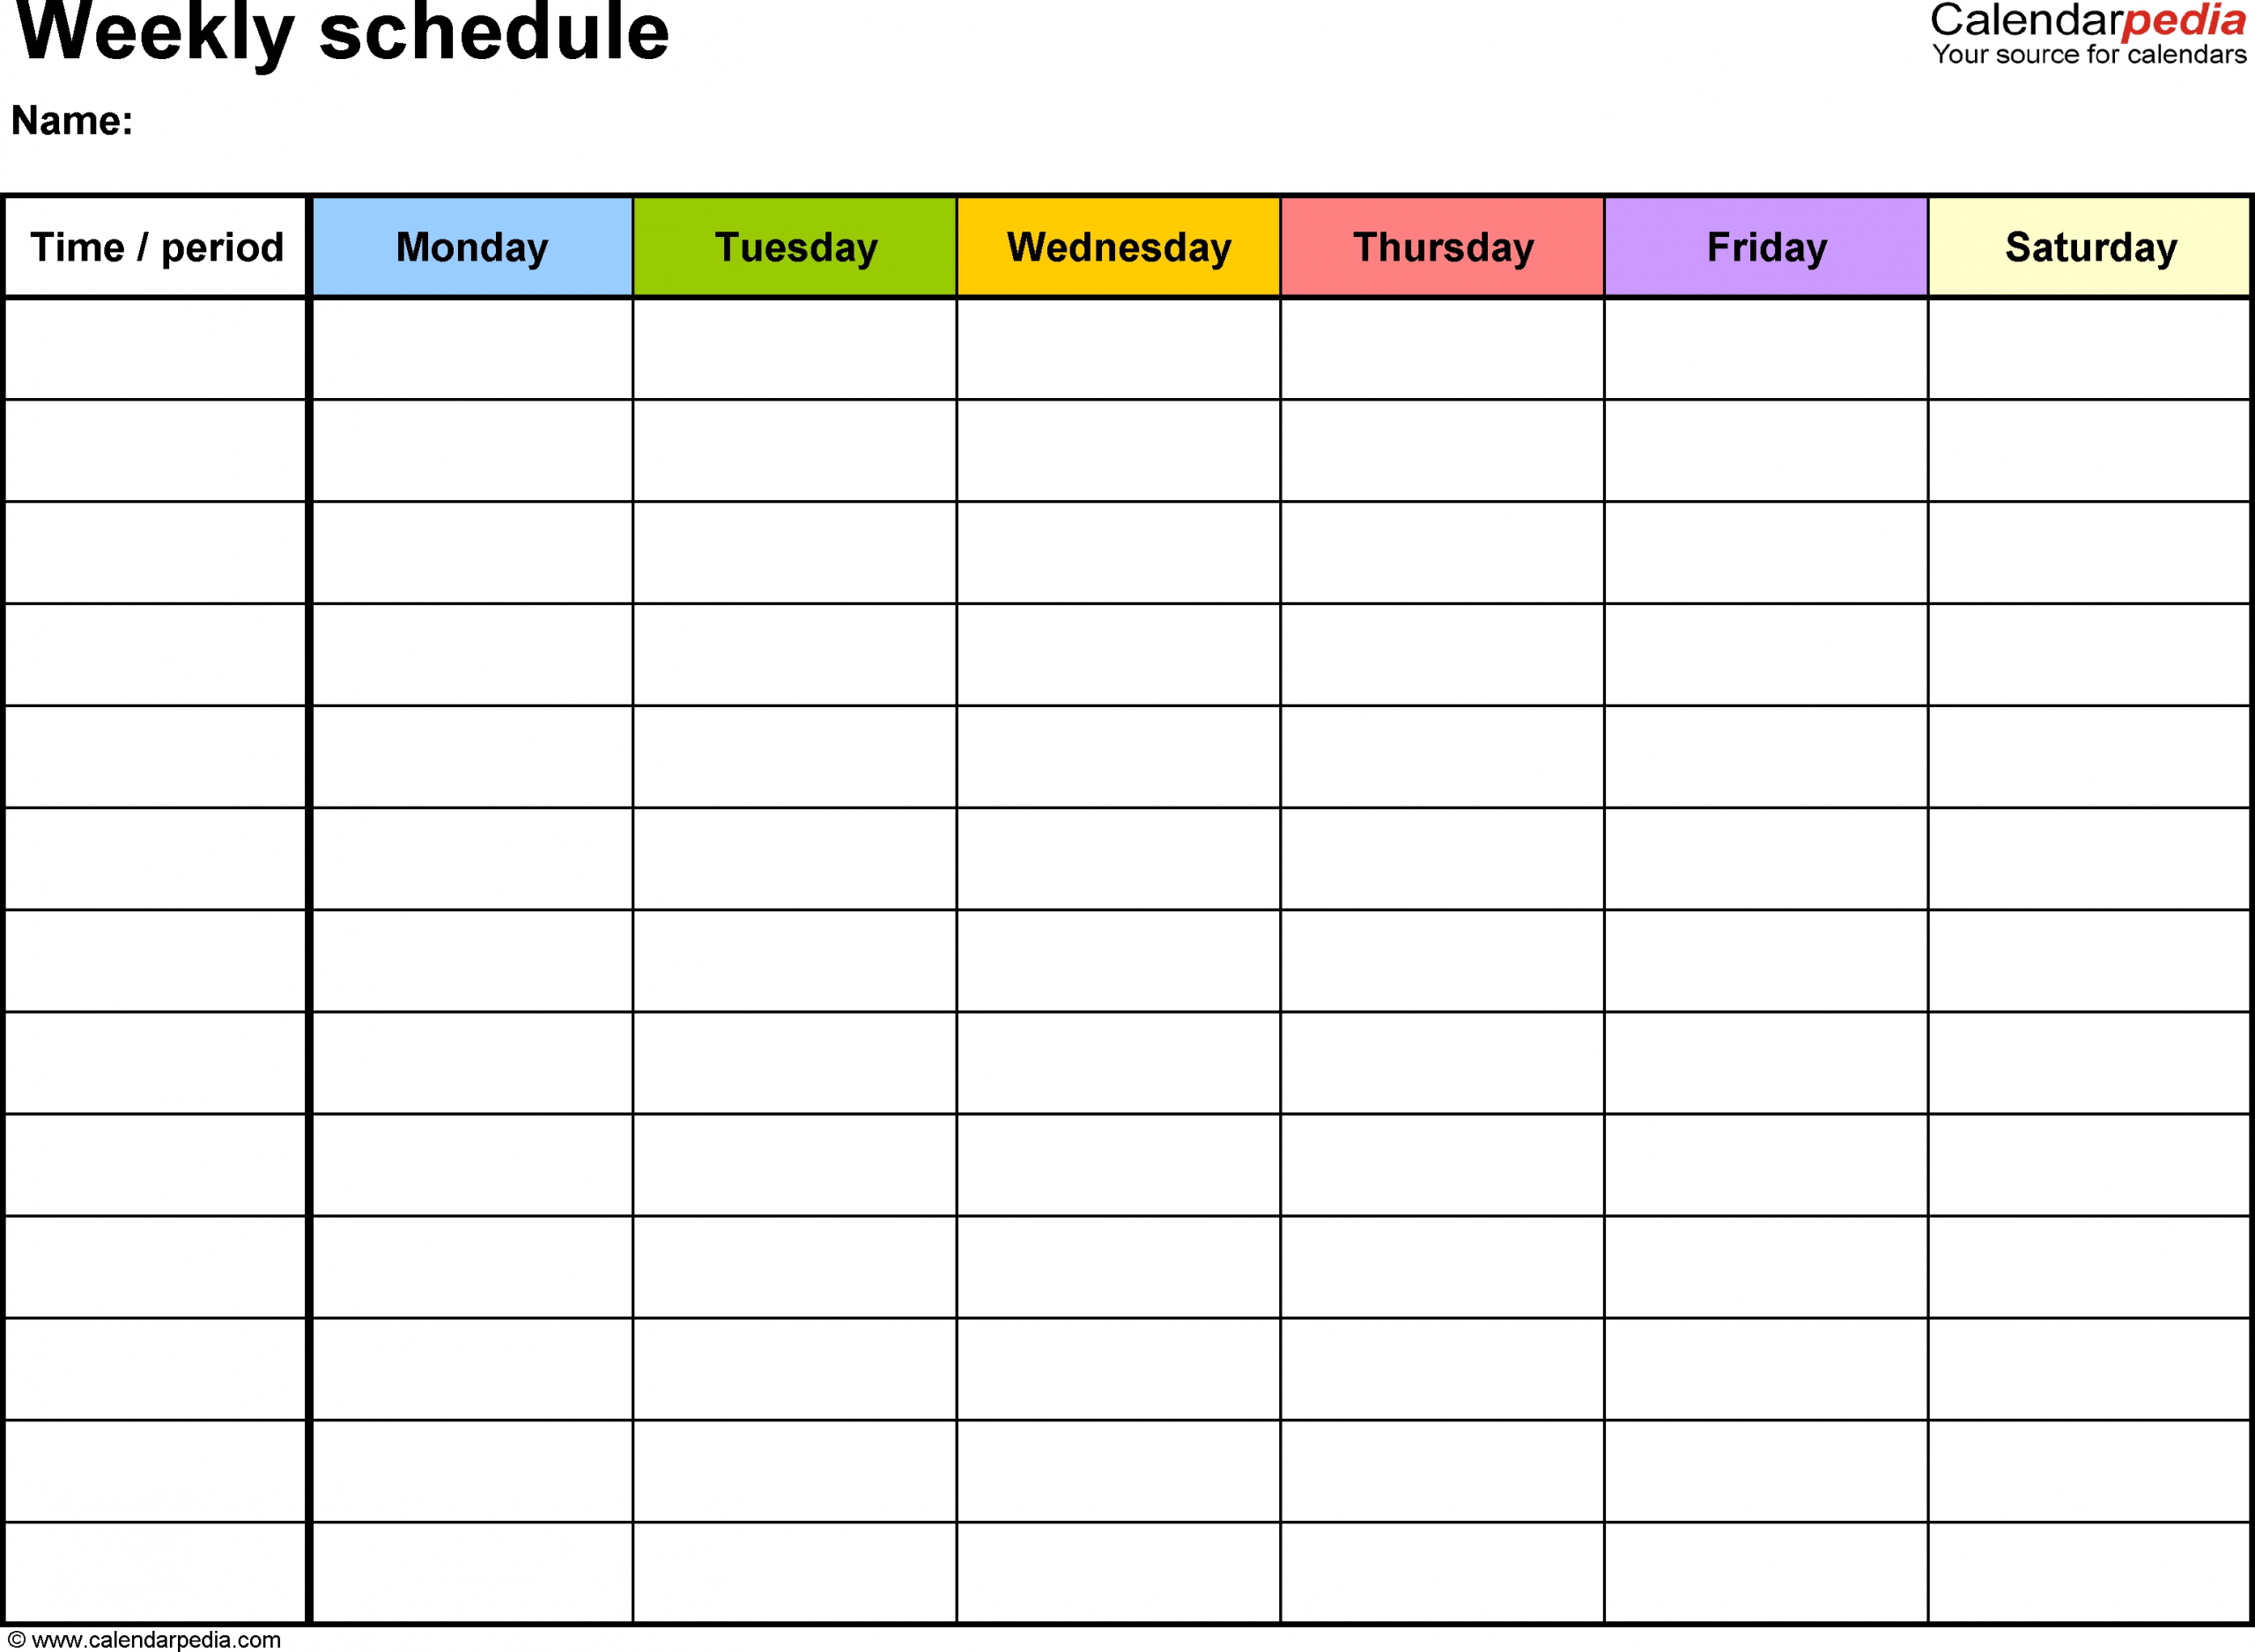 Free Weekly Schedule Templates For Word - 18 Templates regarding Blank Weekly Calender With Time